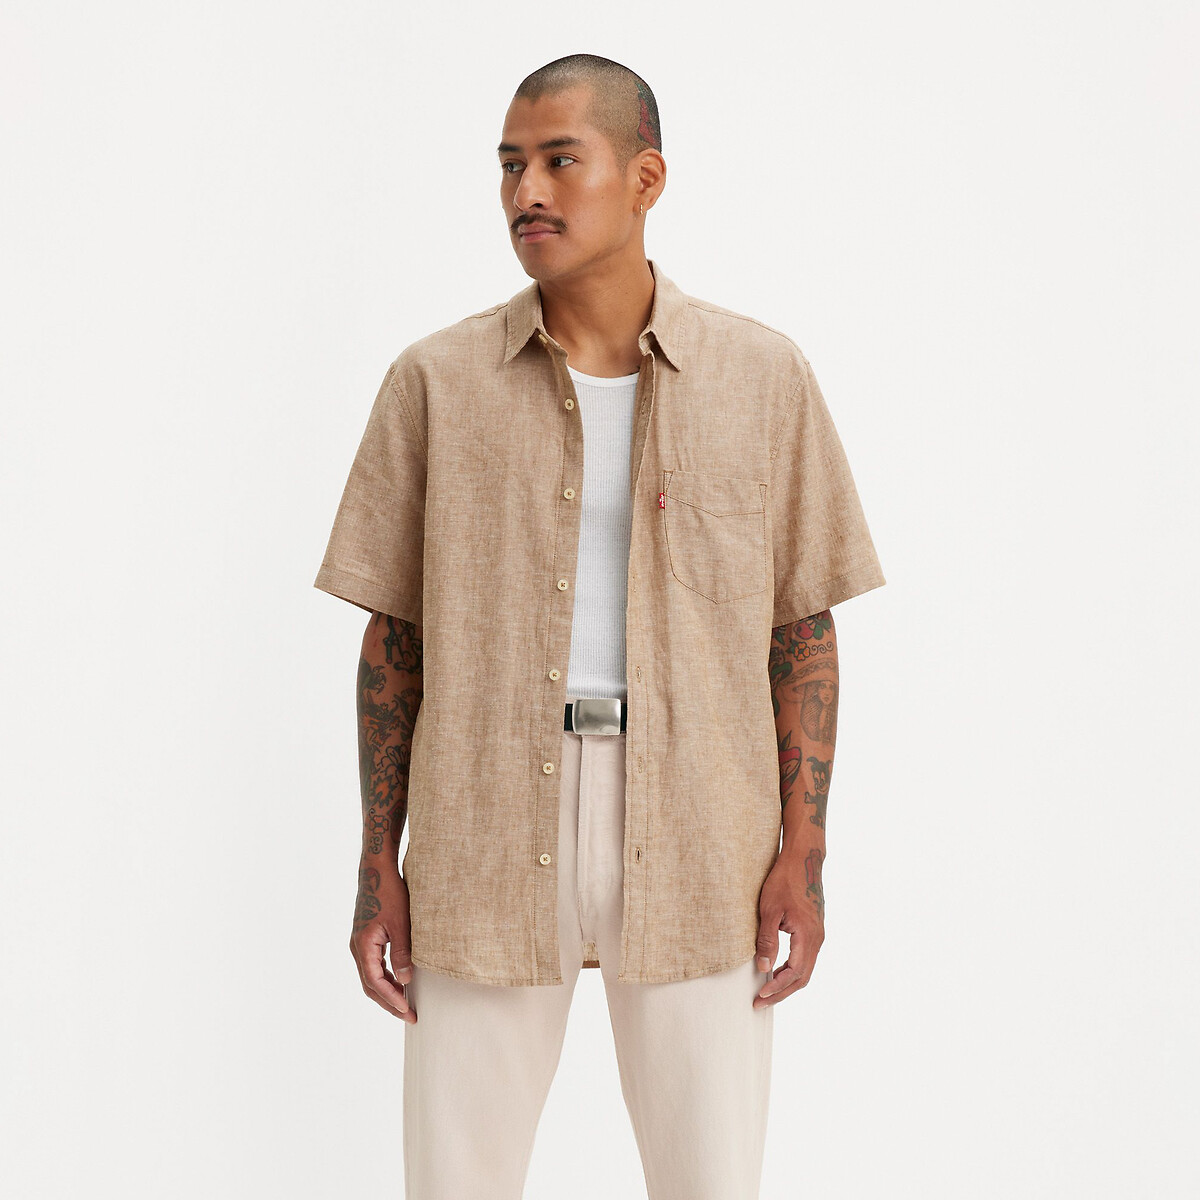 Image of Linen/Cotton Shirt with Short Sleeves